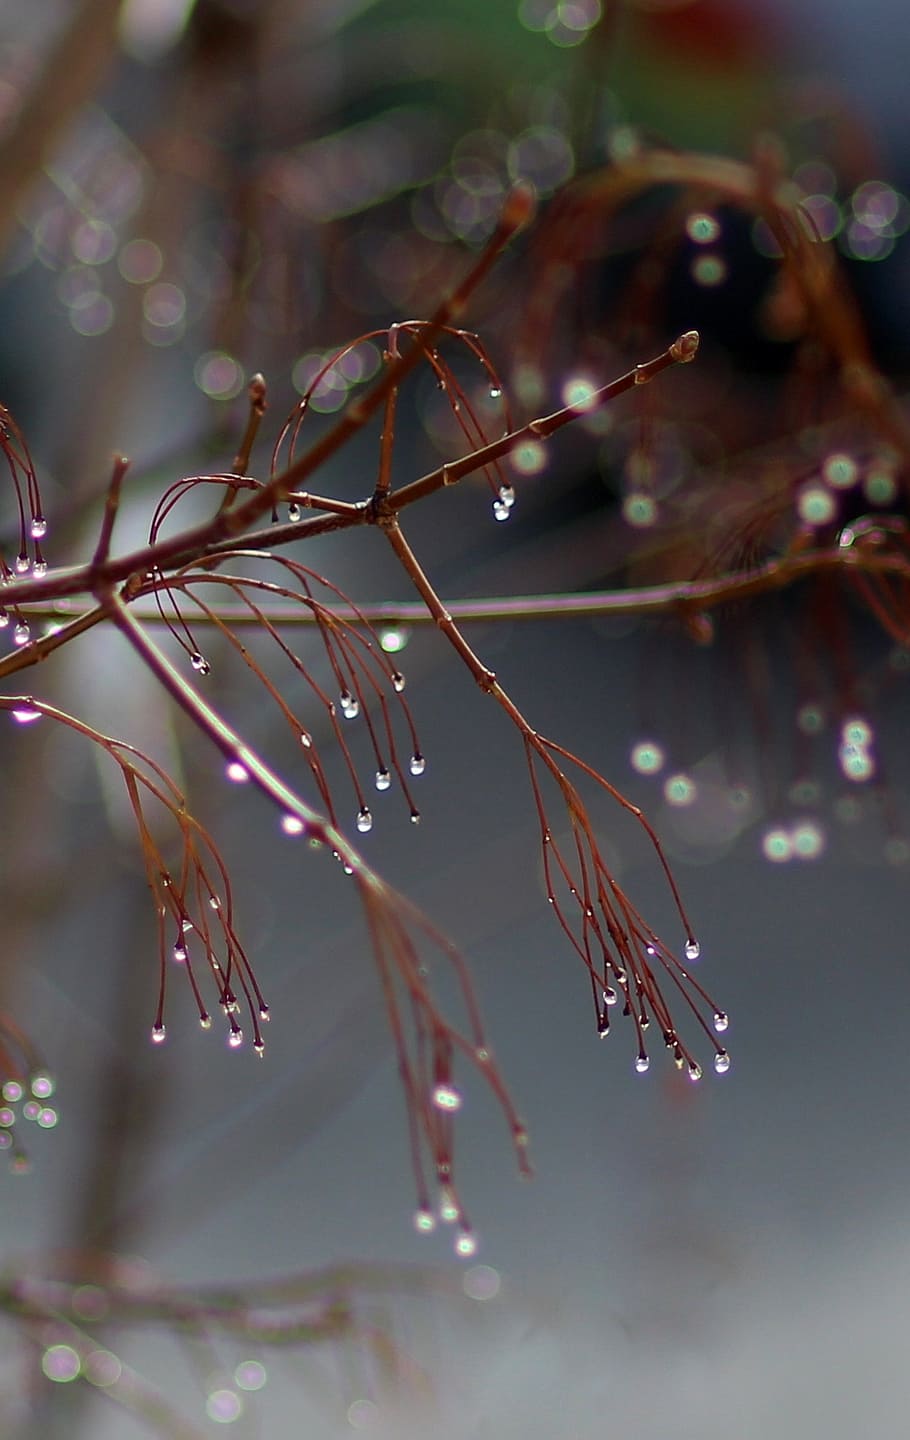 casey, drop, frozen, plant, tree, shine, close-up, focus on foreground, growth, beauty in nature